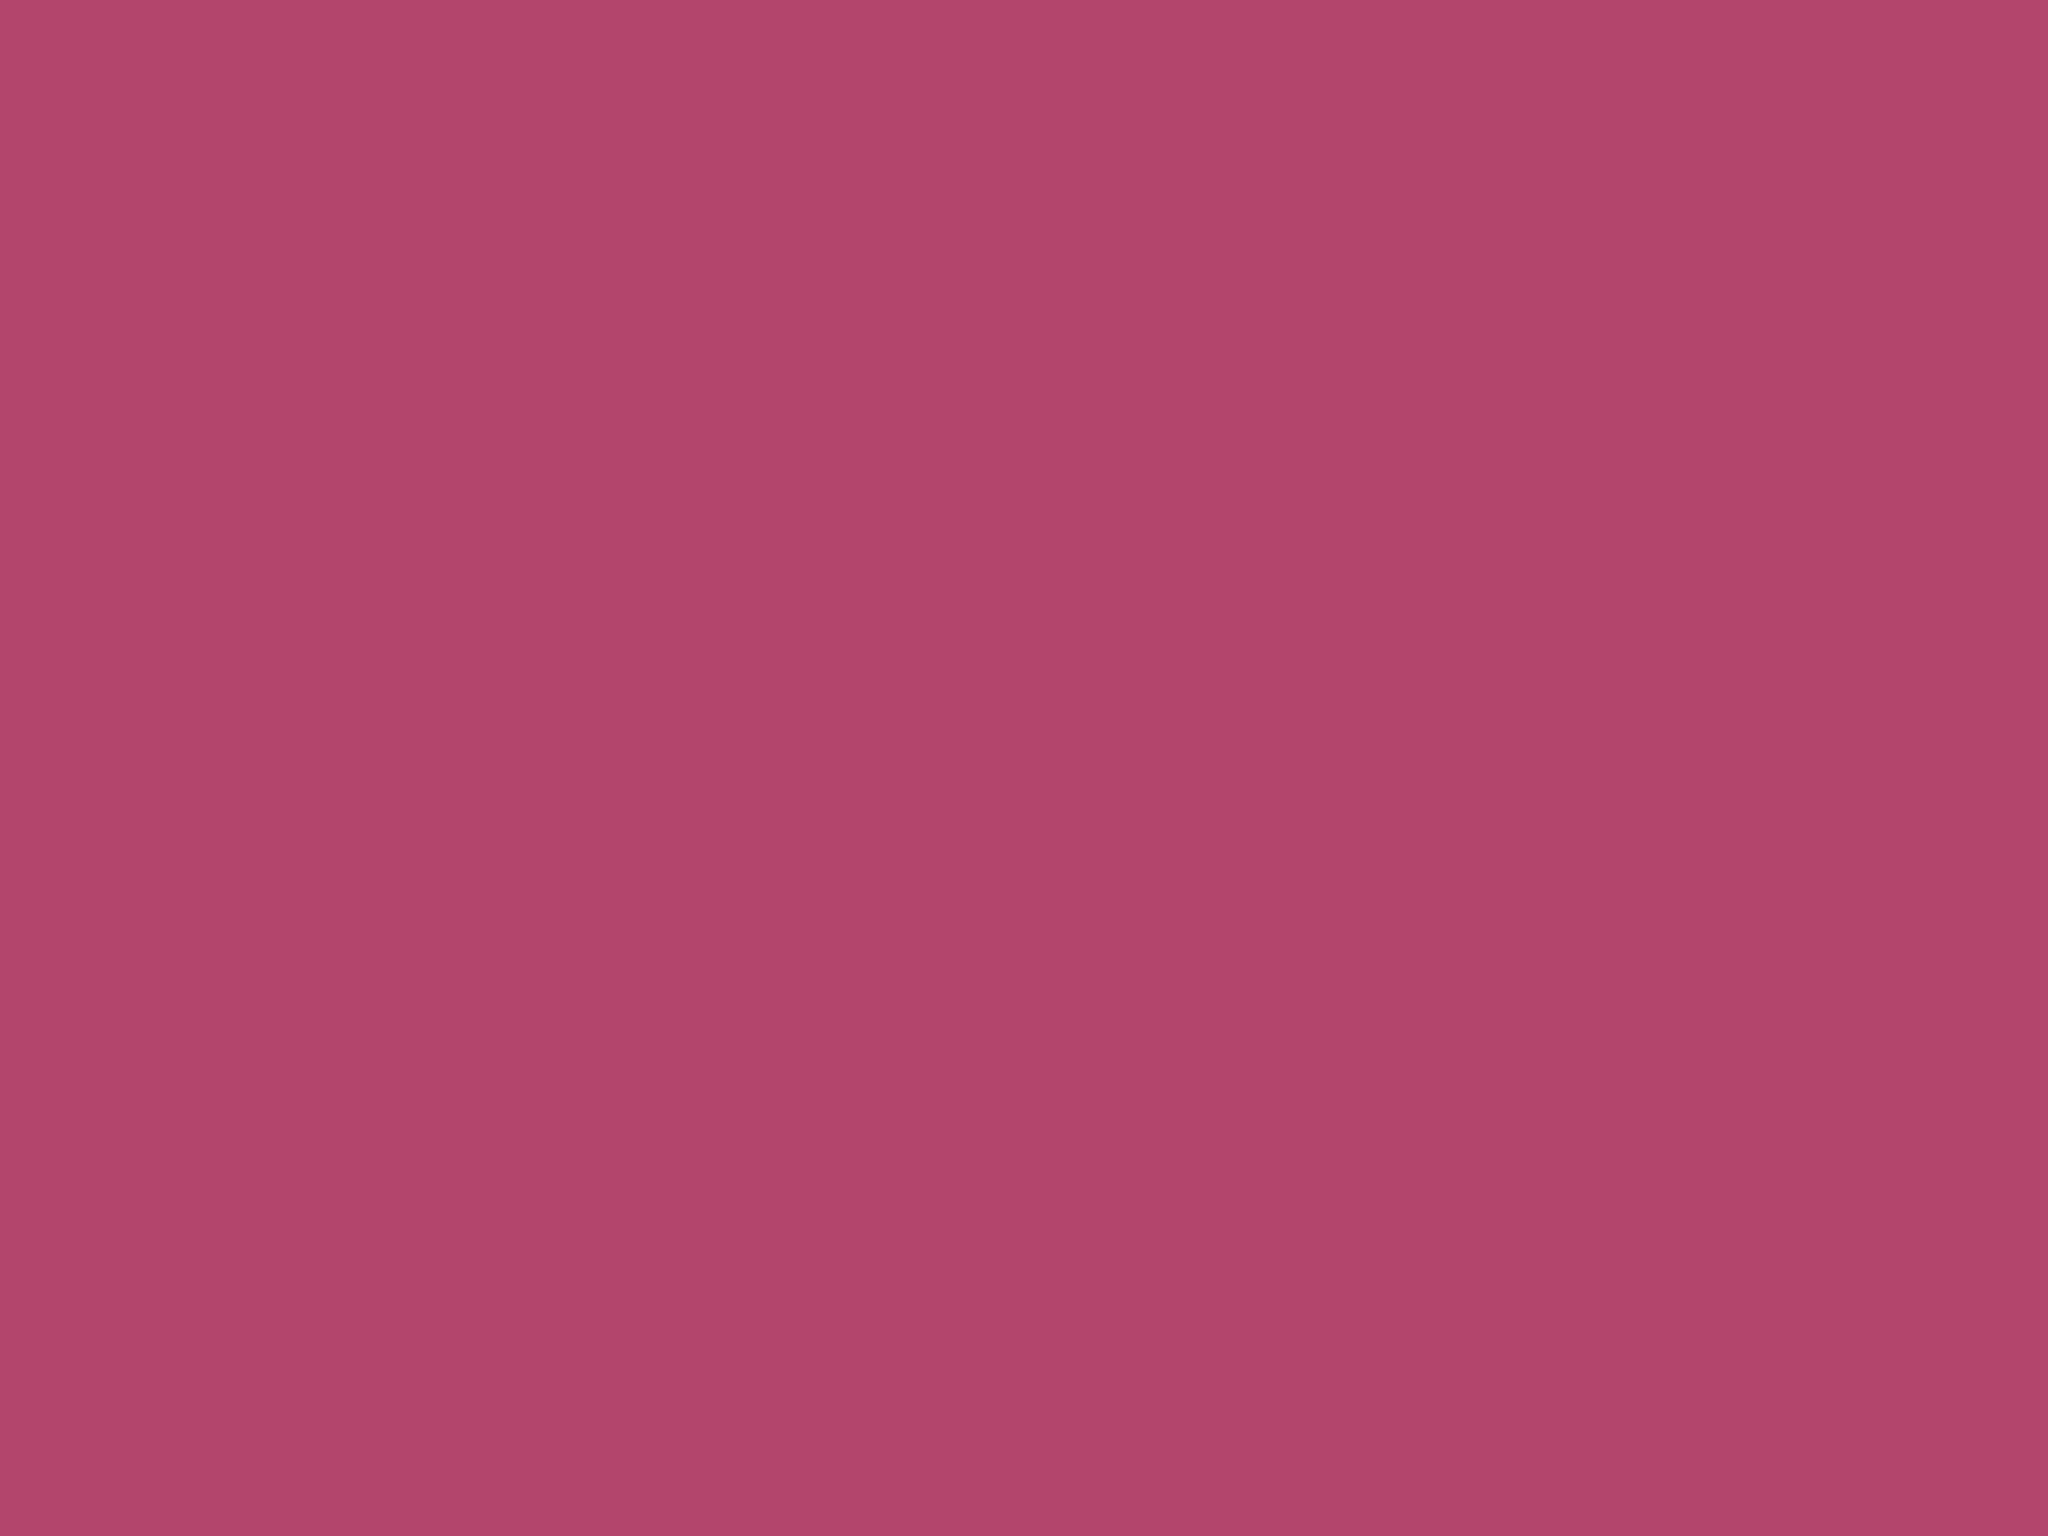 2048x1536 Raspberry Rose Solid Color Background